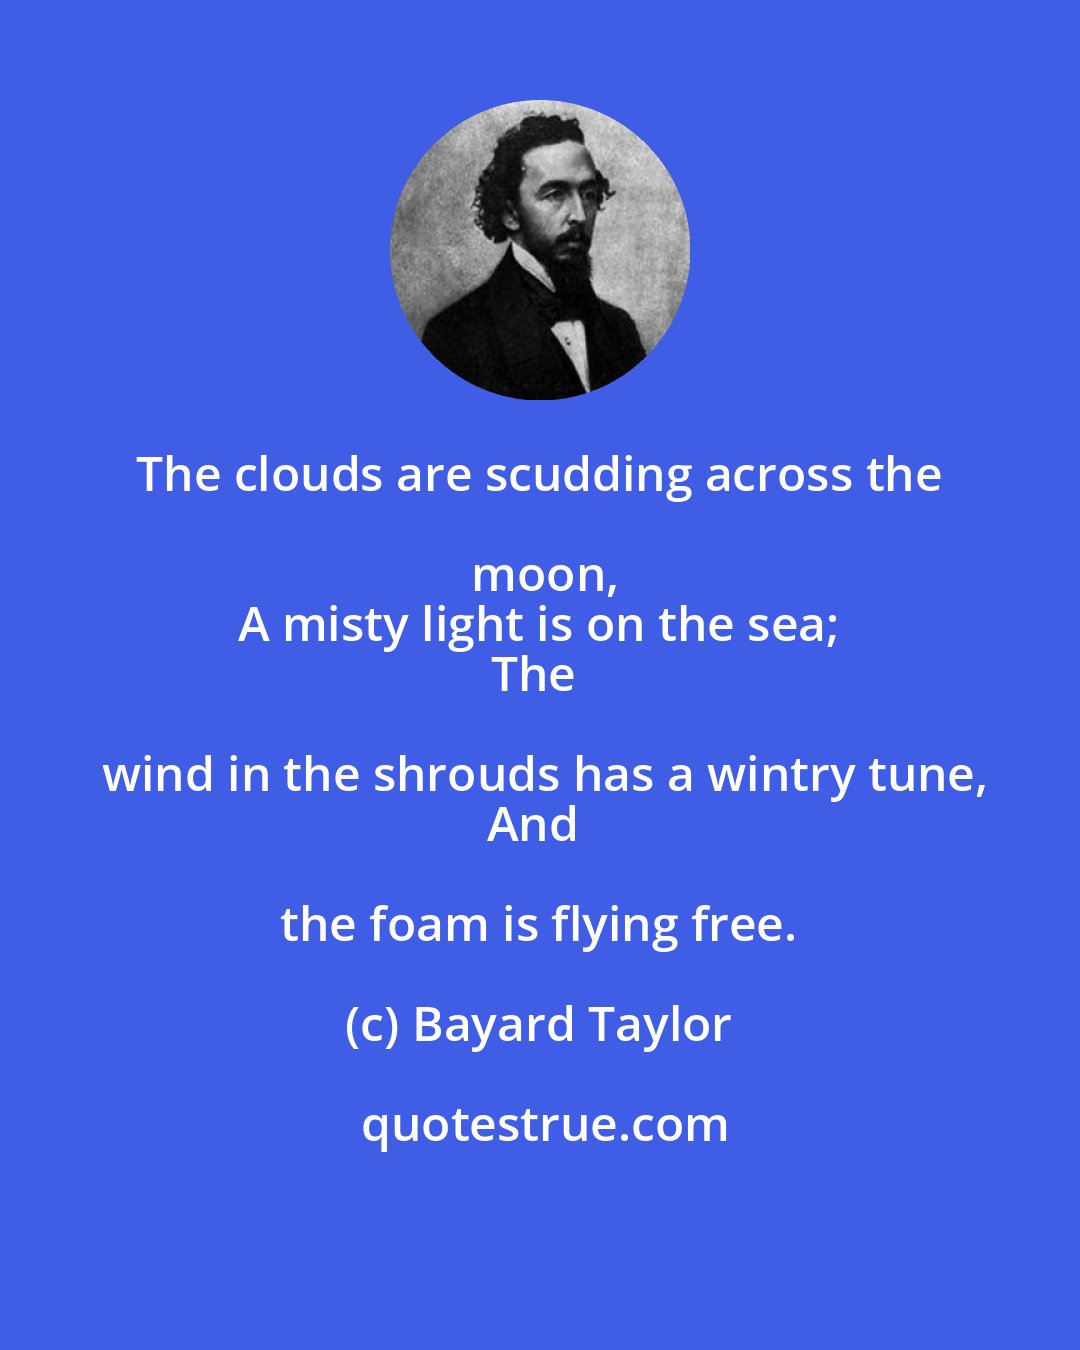 Bayard Taylor: The clouds are scudding across the moon,
A misty light is on the sea;
The wind in the shrouds has a wintry tune,
And the foam is flying free.